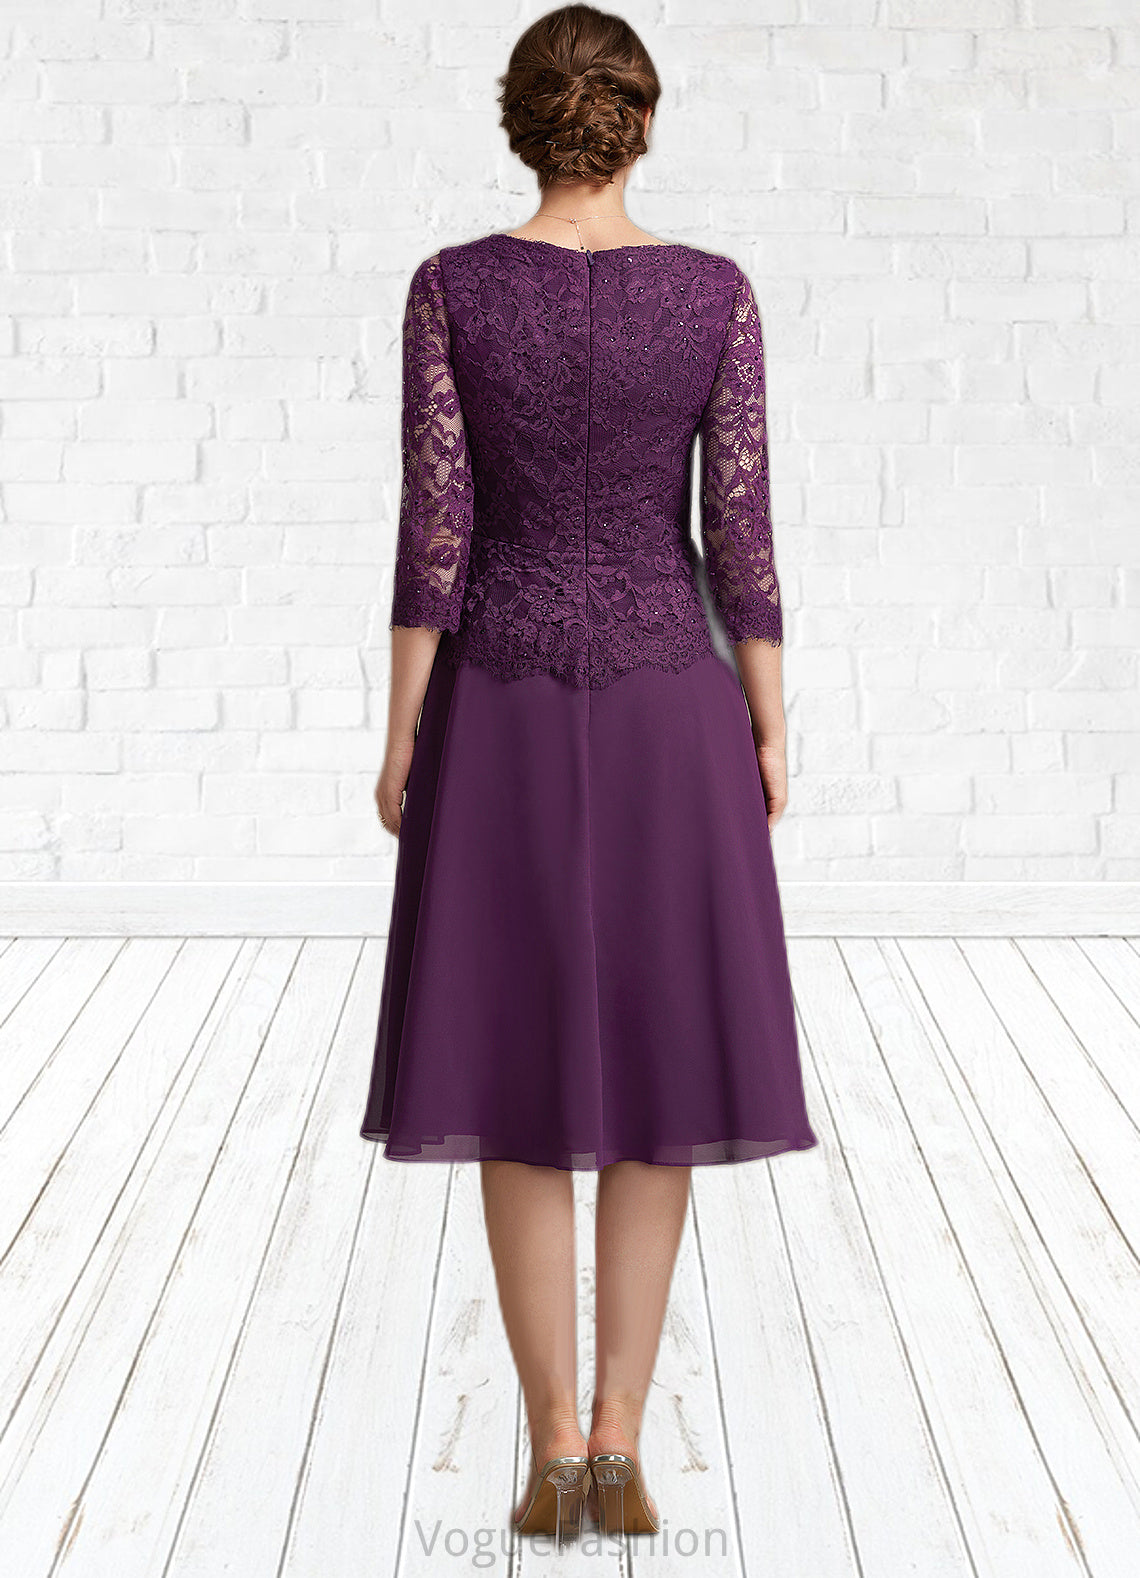 Audrey A-Line V-neck Knee-Length Chiffon Lace Mother of the Bride Dress With Beading Sequins DK126P0015035